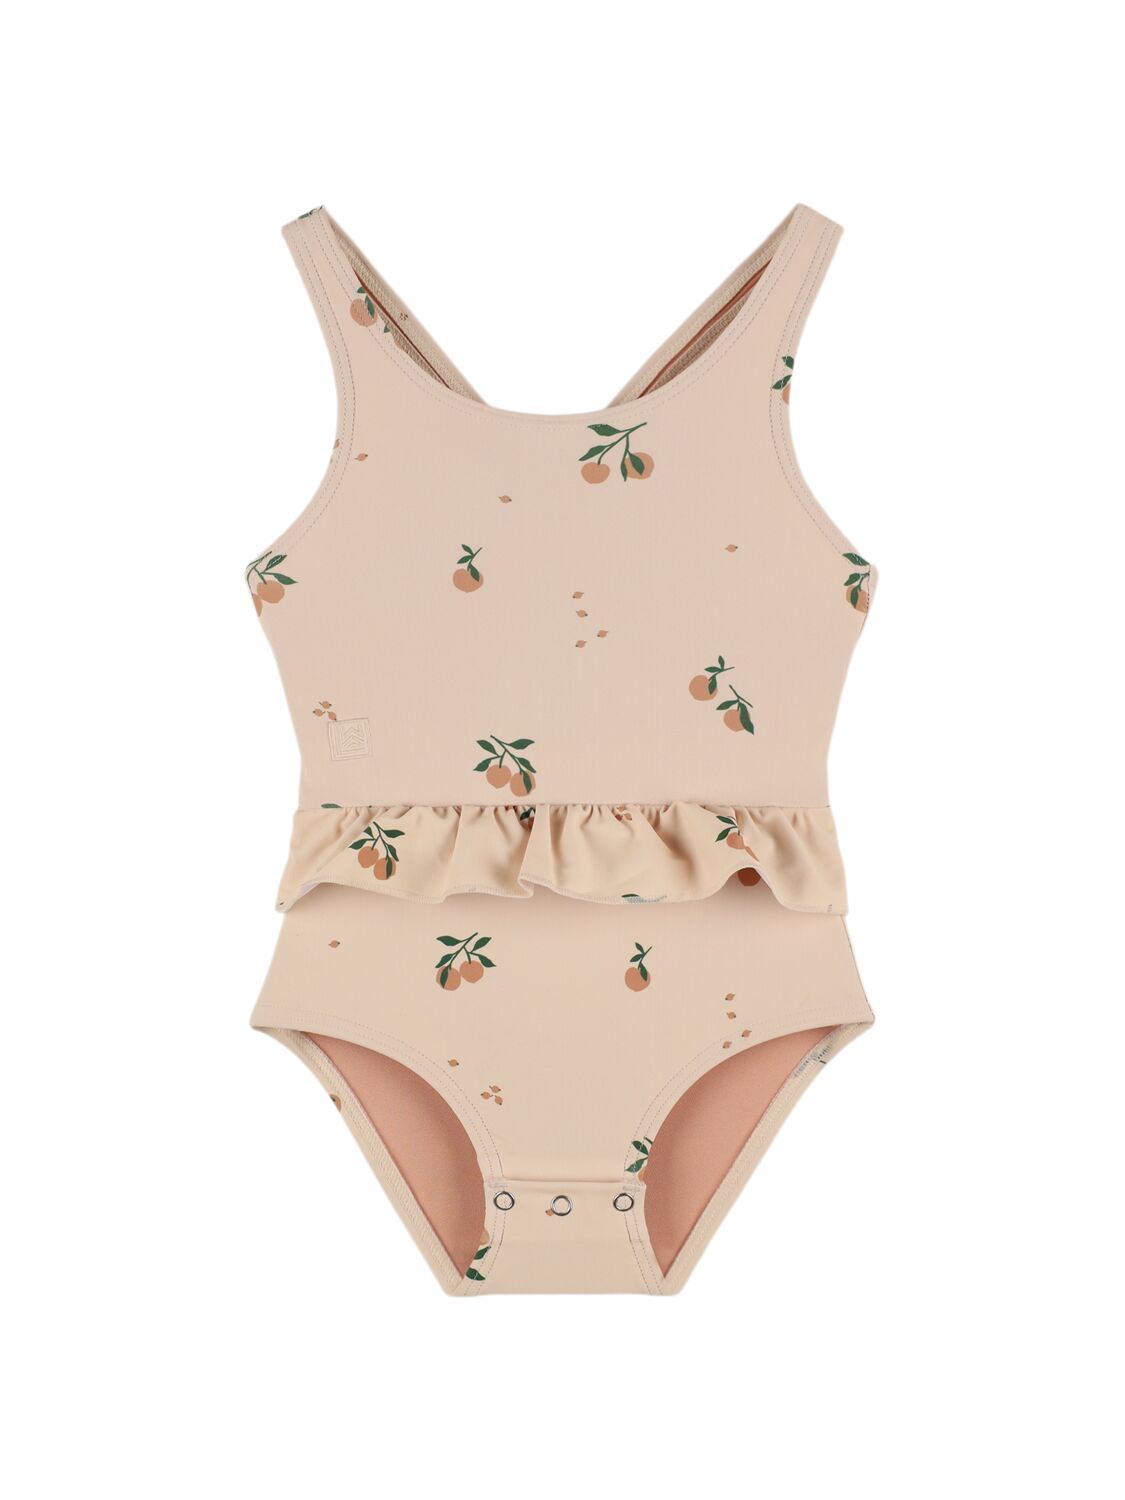 Liewood Kids' Hearts Recycled Nylon One Piece Swimsuit In 베이지